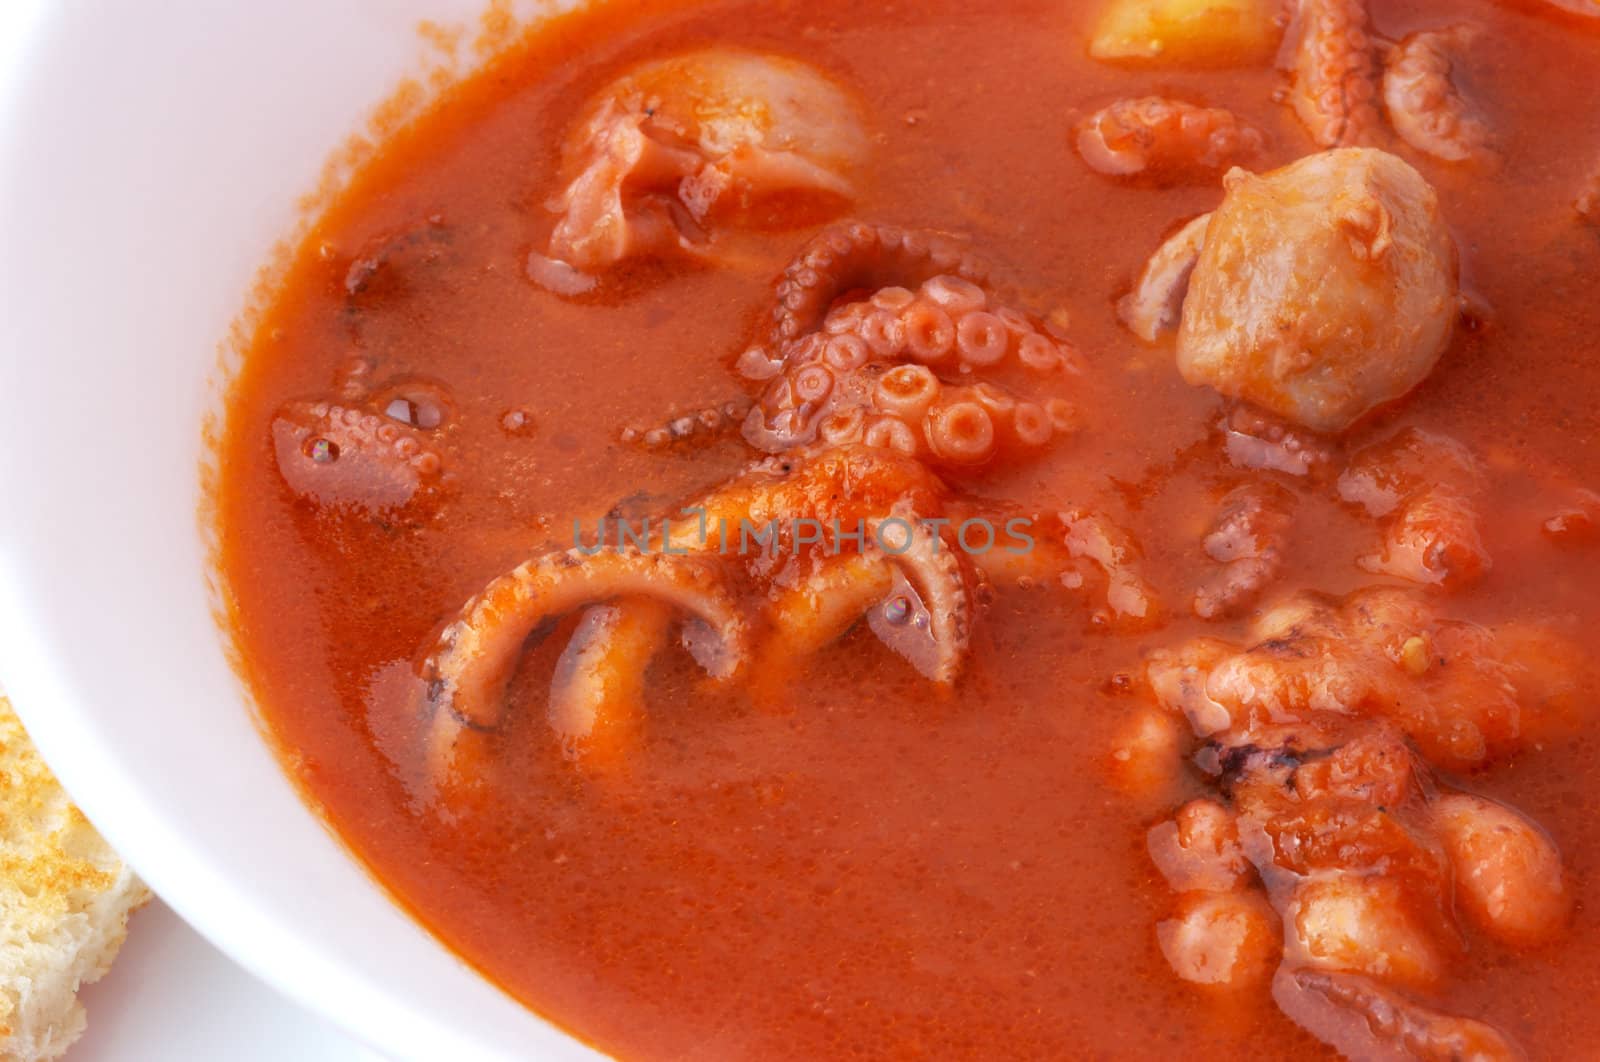 seafood tomato soup from cuttlefish, octopuses amd other molluscs